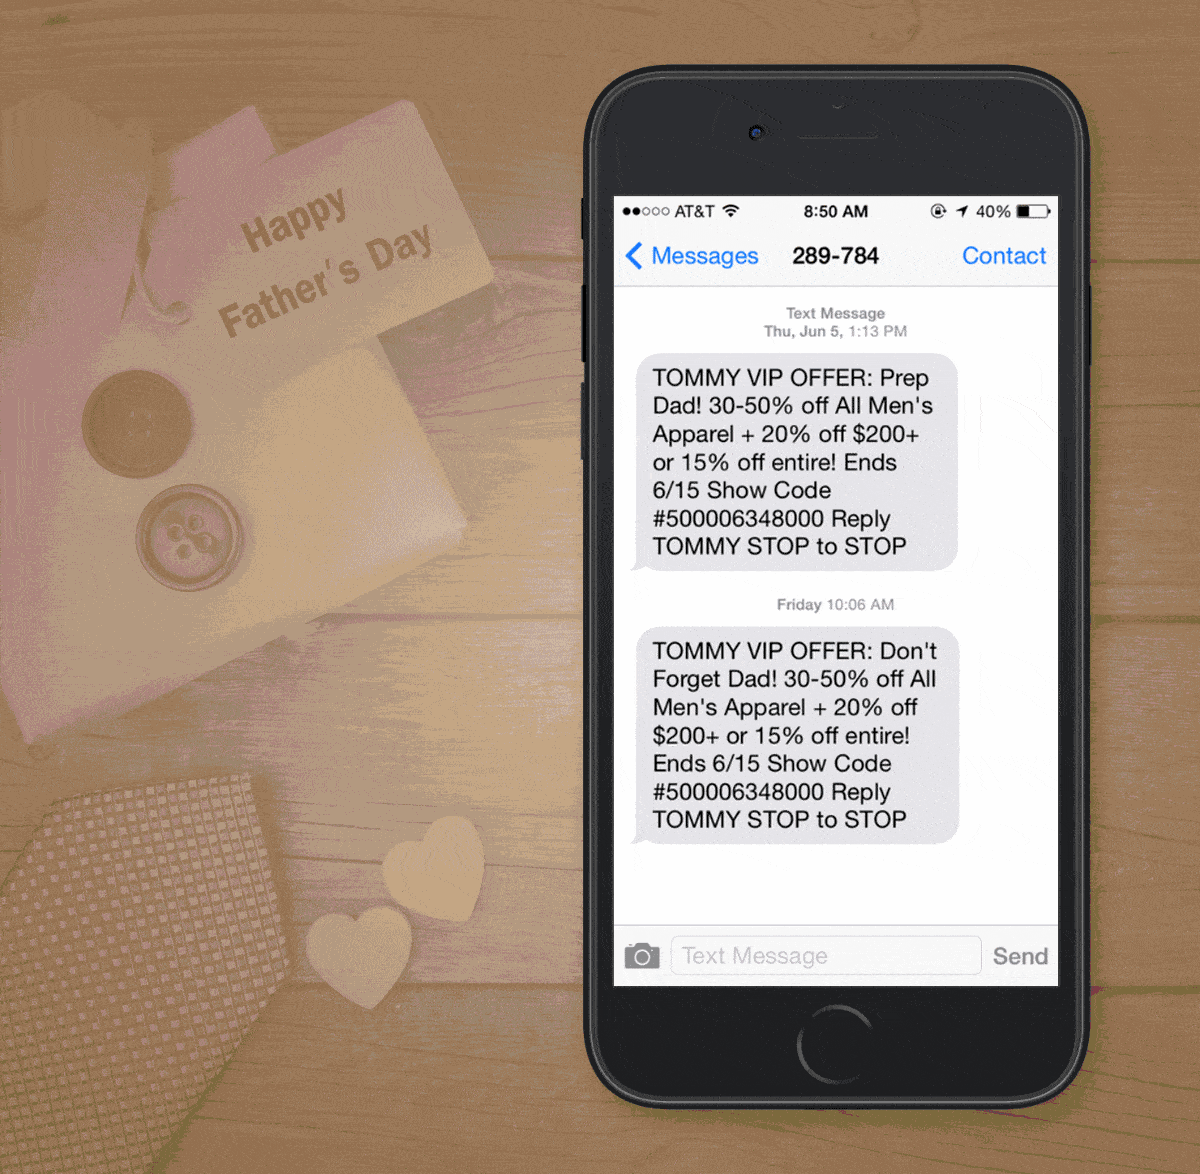 SMS Marketing for Fathers Day